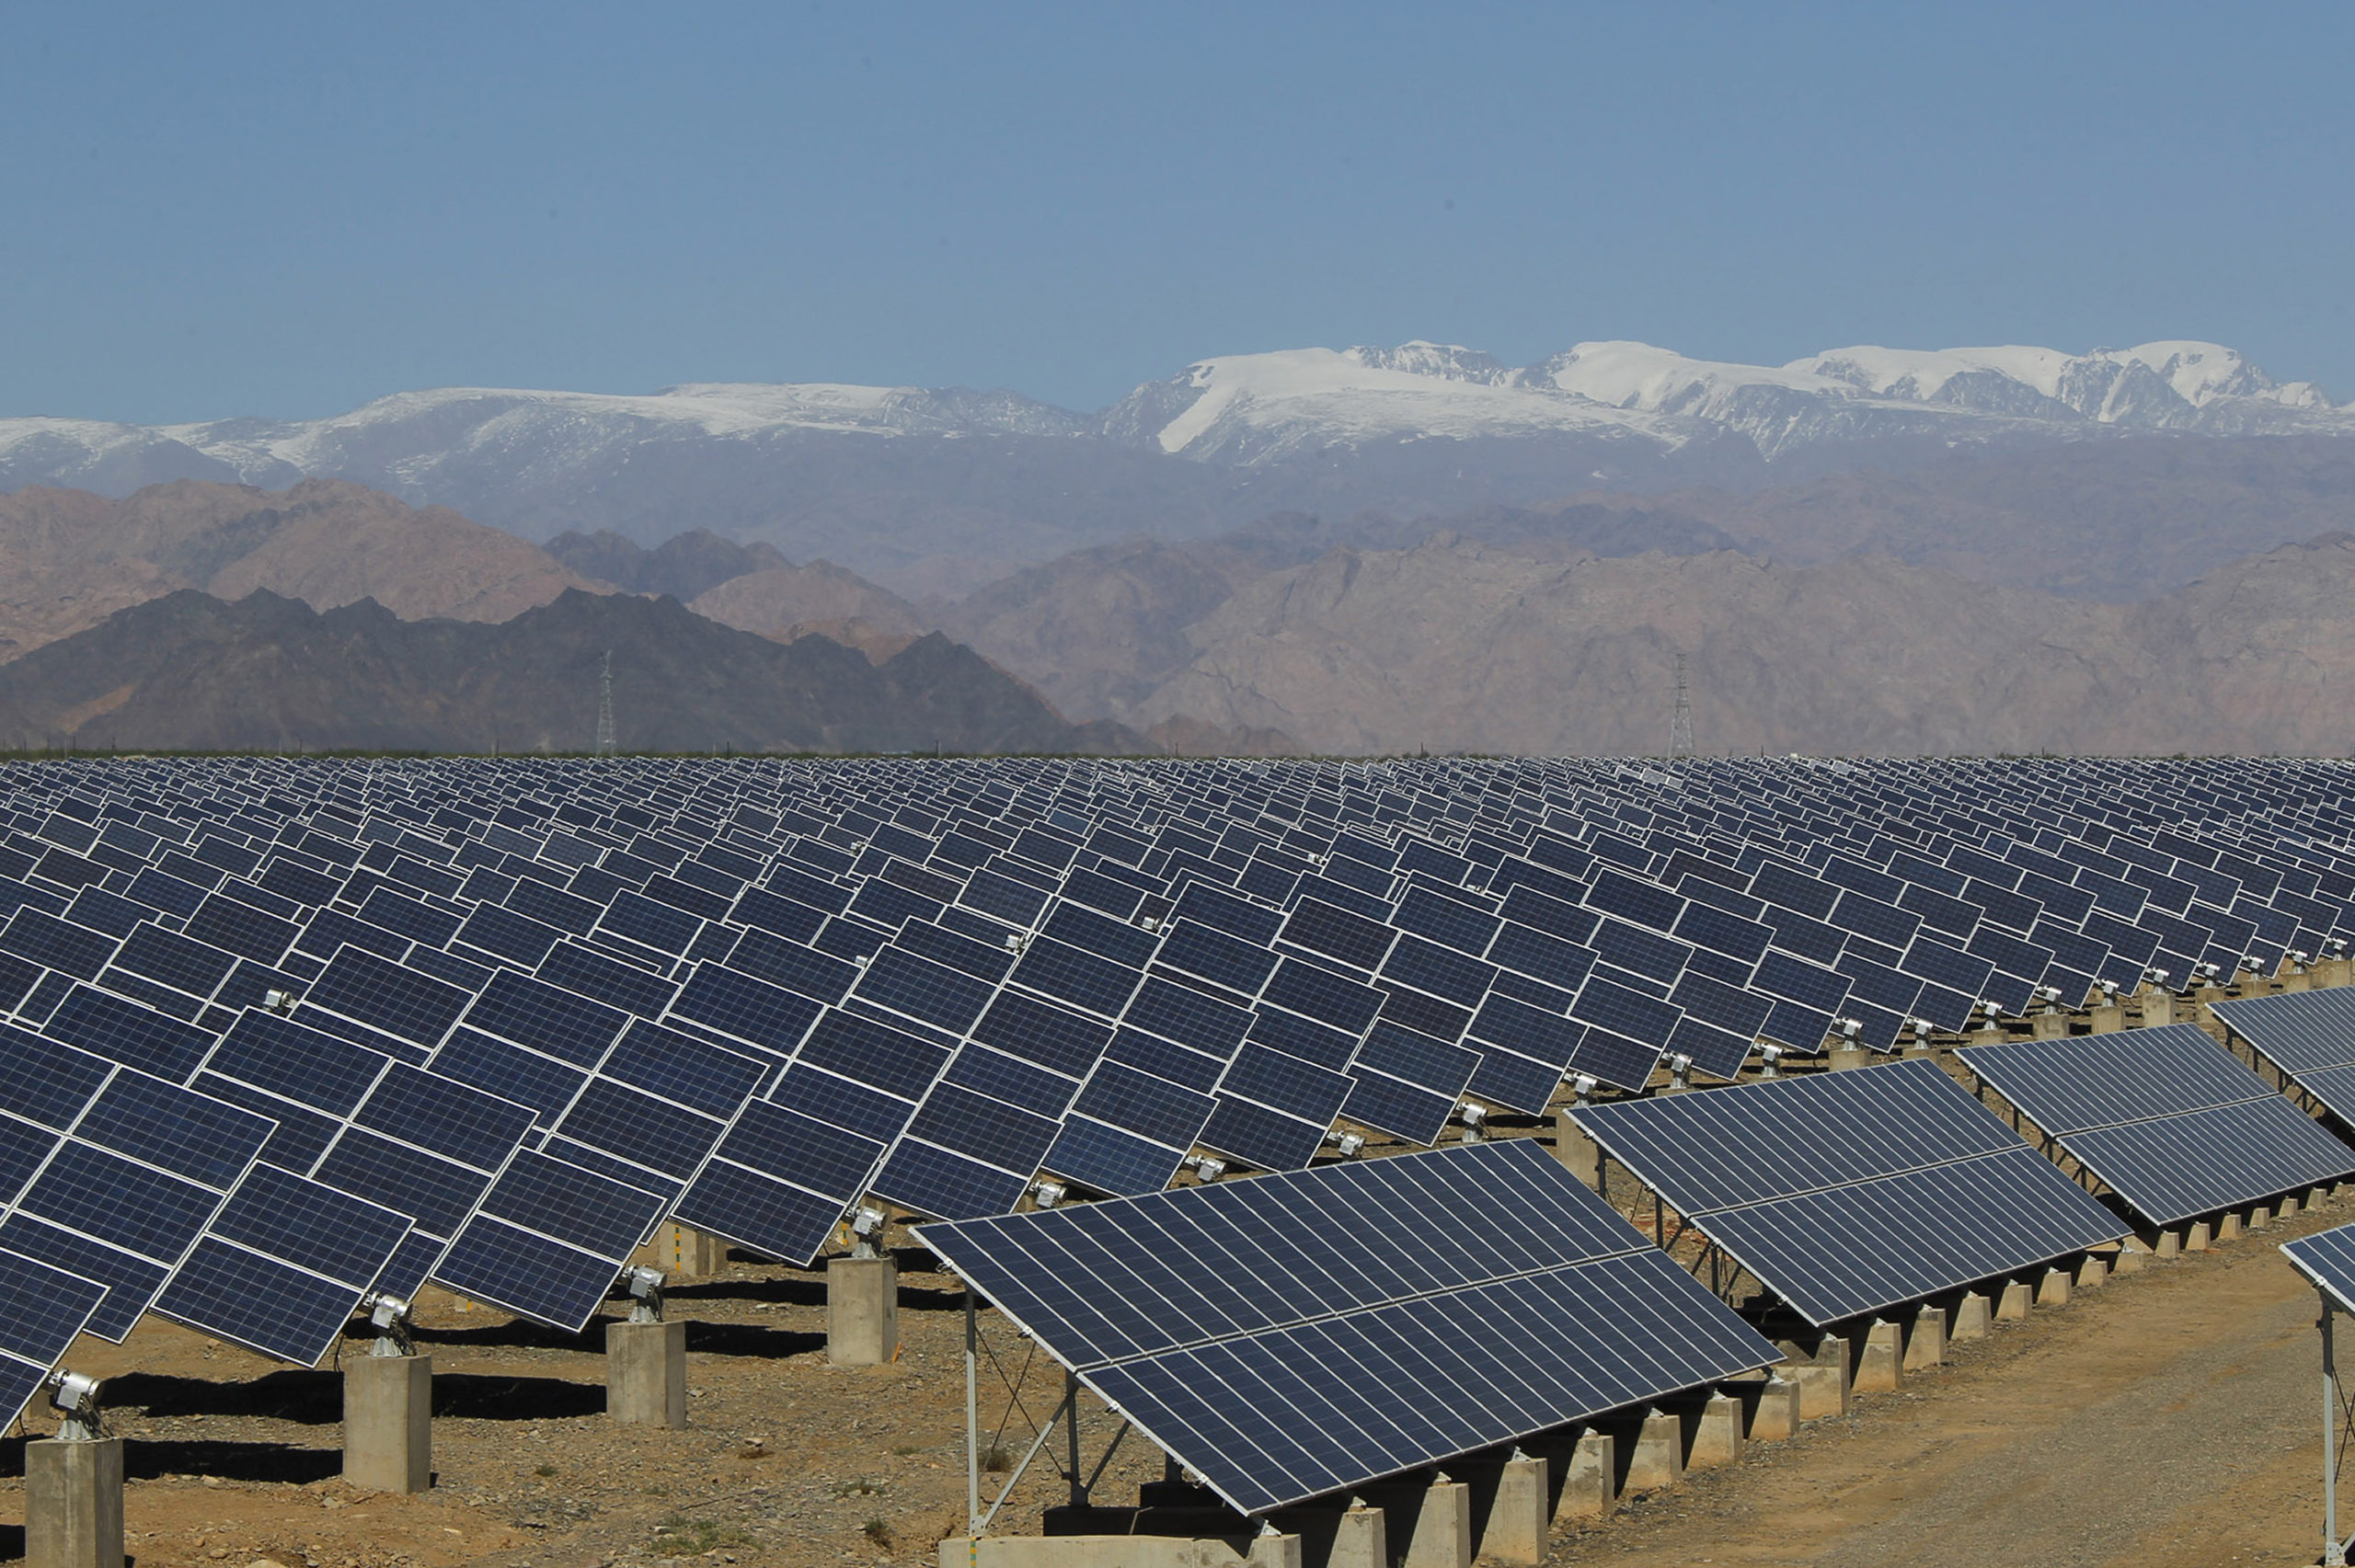 Large solar panels are seen in a solar power plant in Hami, northwest China's Xinjiang Uygur Autonomous Region on May 8, 2013. 